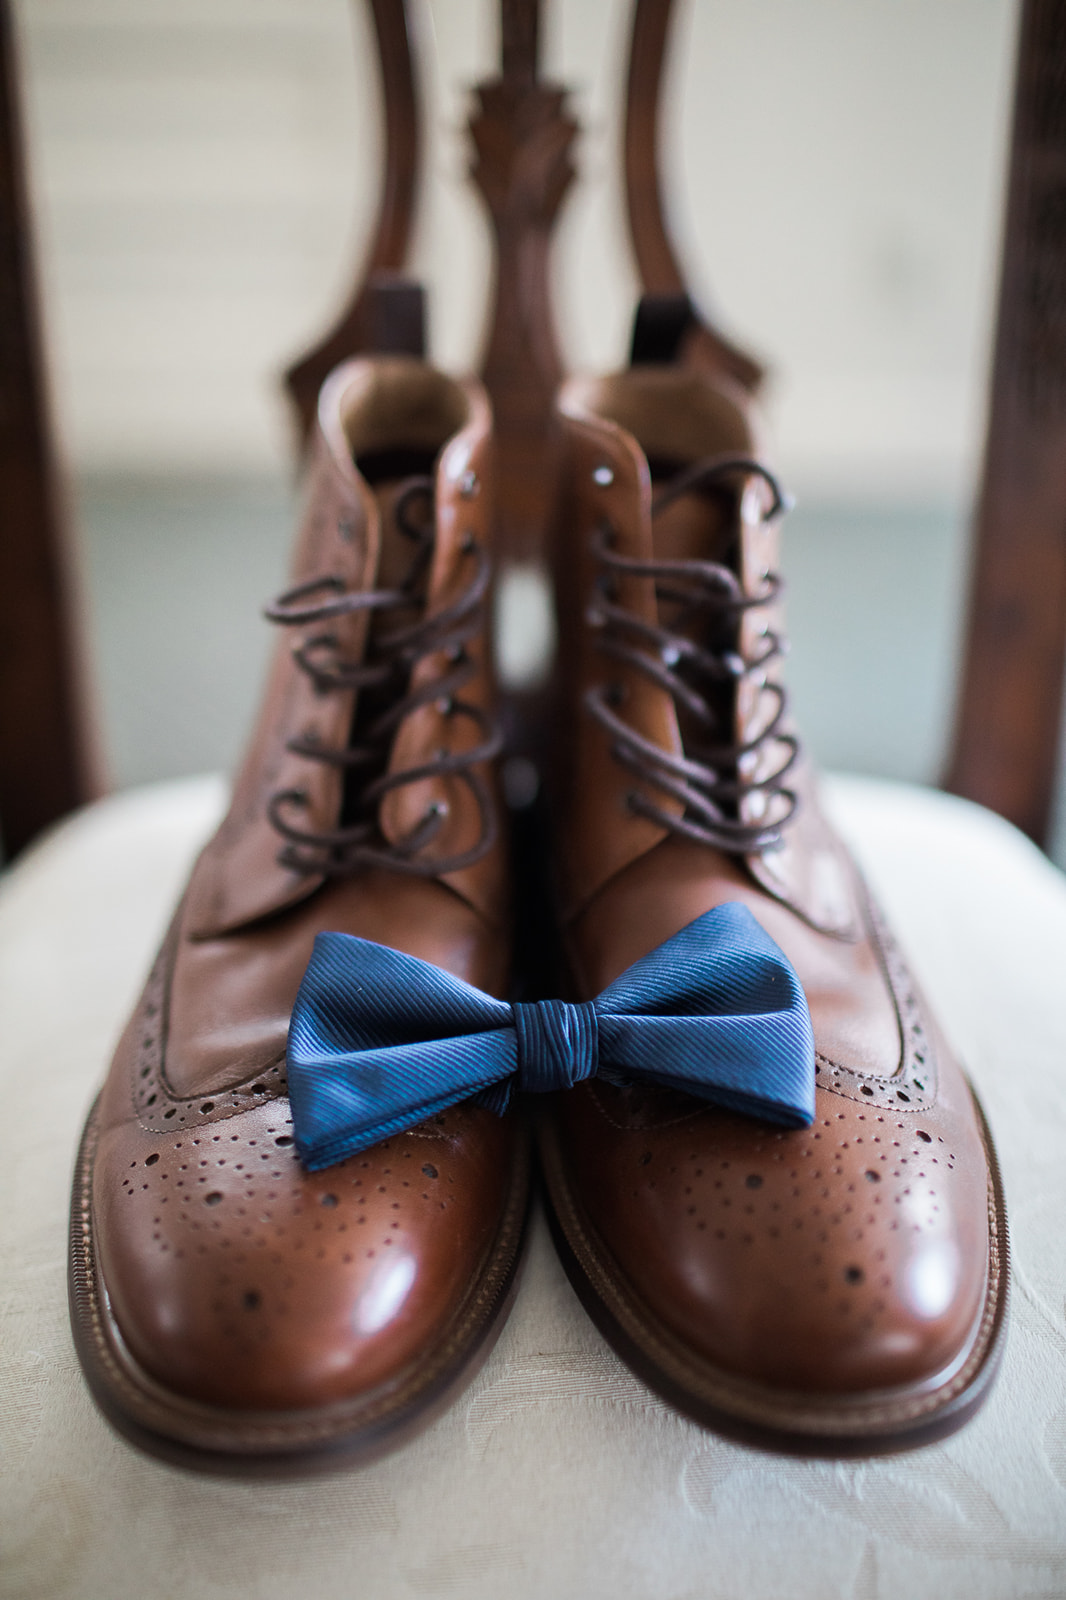 groom's shoes and bowtie for willow manor in morrison colorado